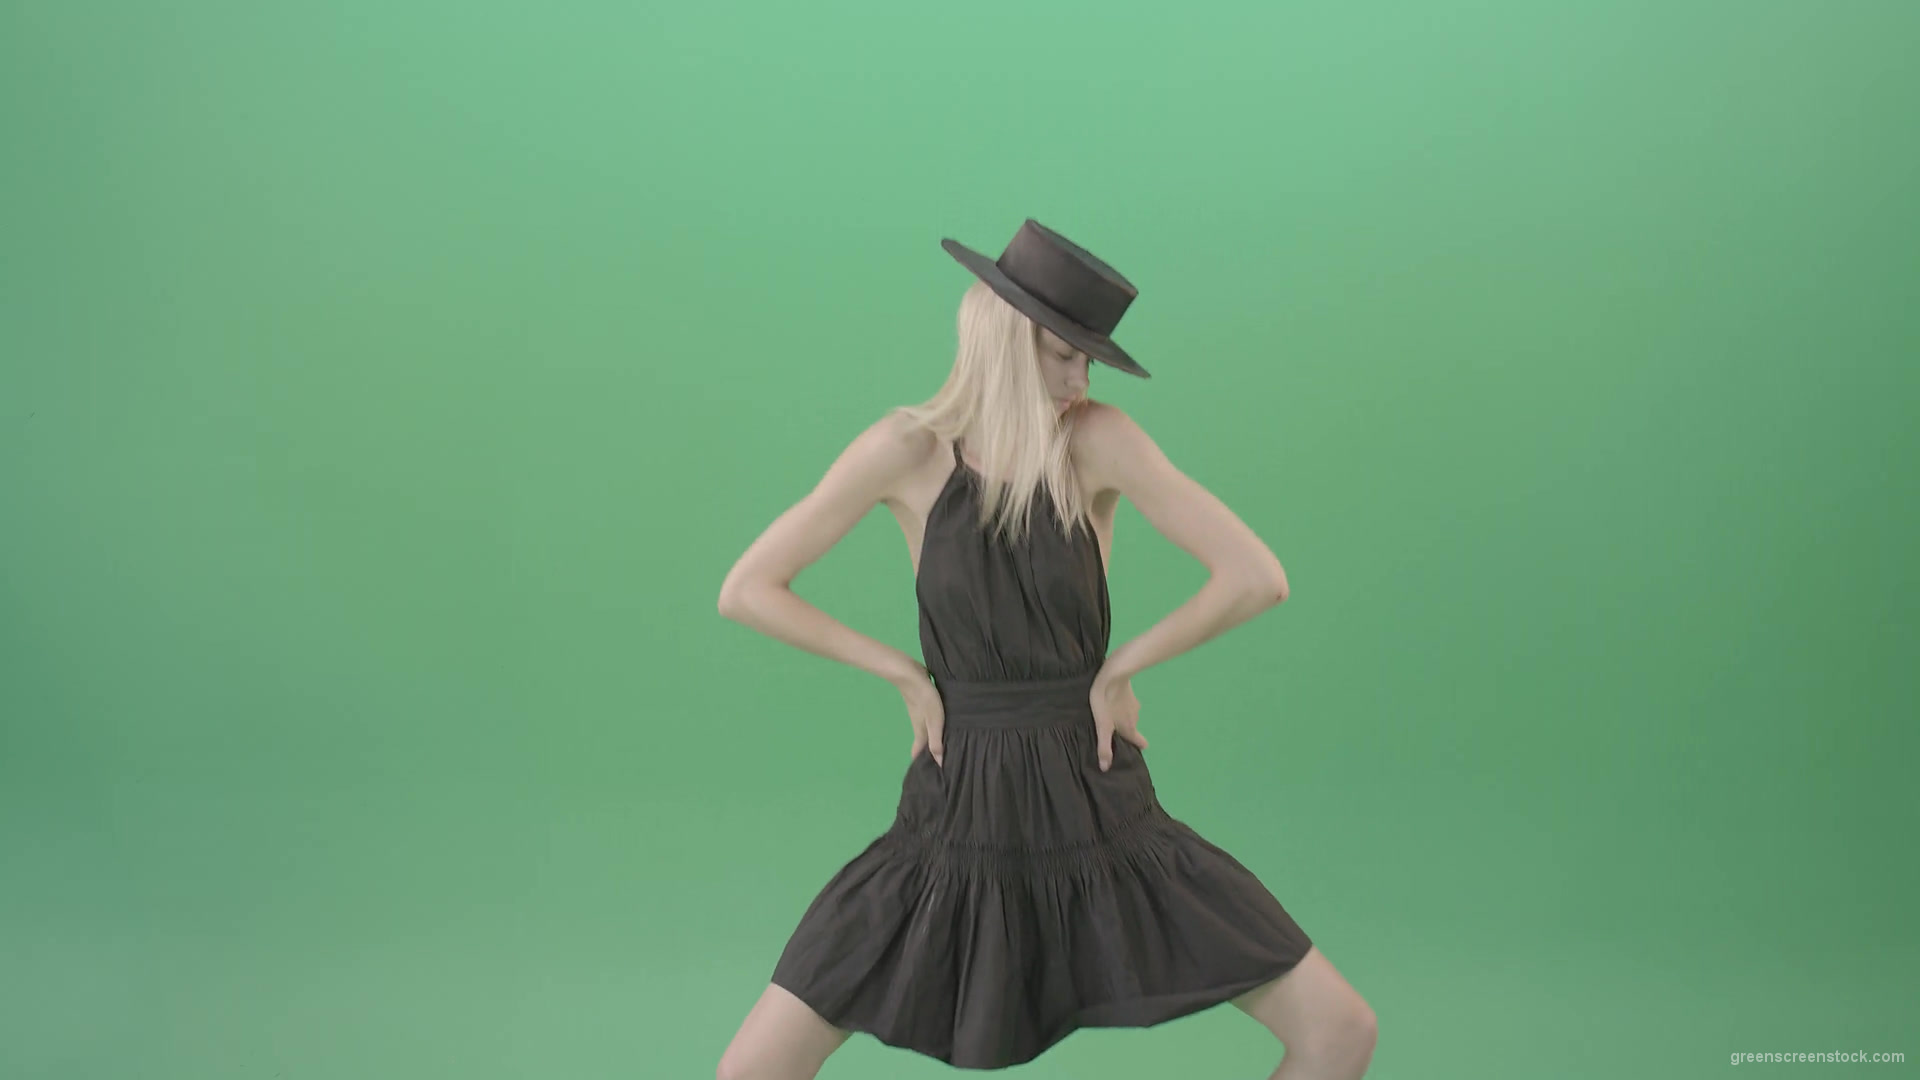 Fashion-model-in-black-dress-posing-dance-isolated-on-green-background-4K-Video-Footage-1920_006 Green Screen Stock